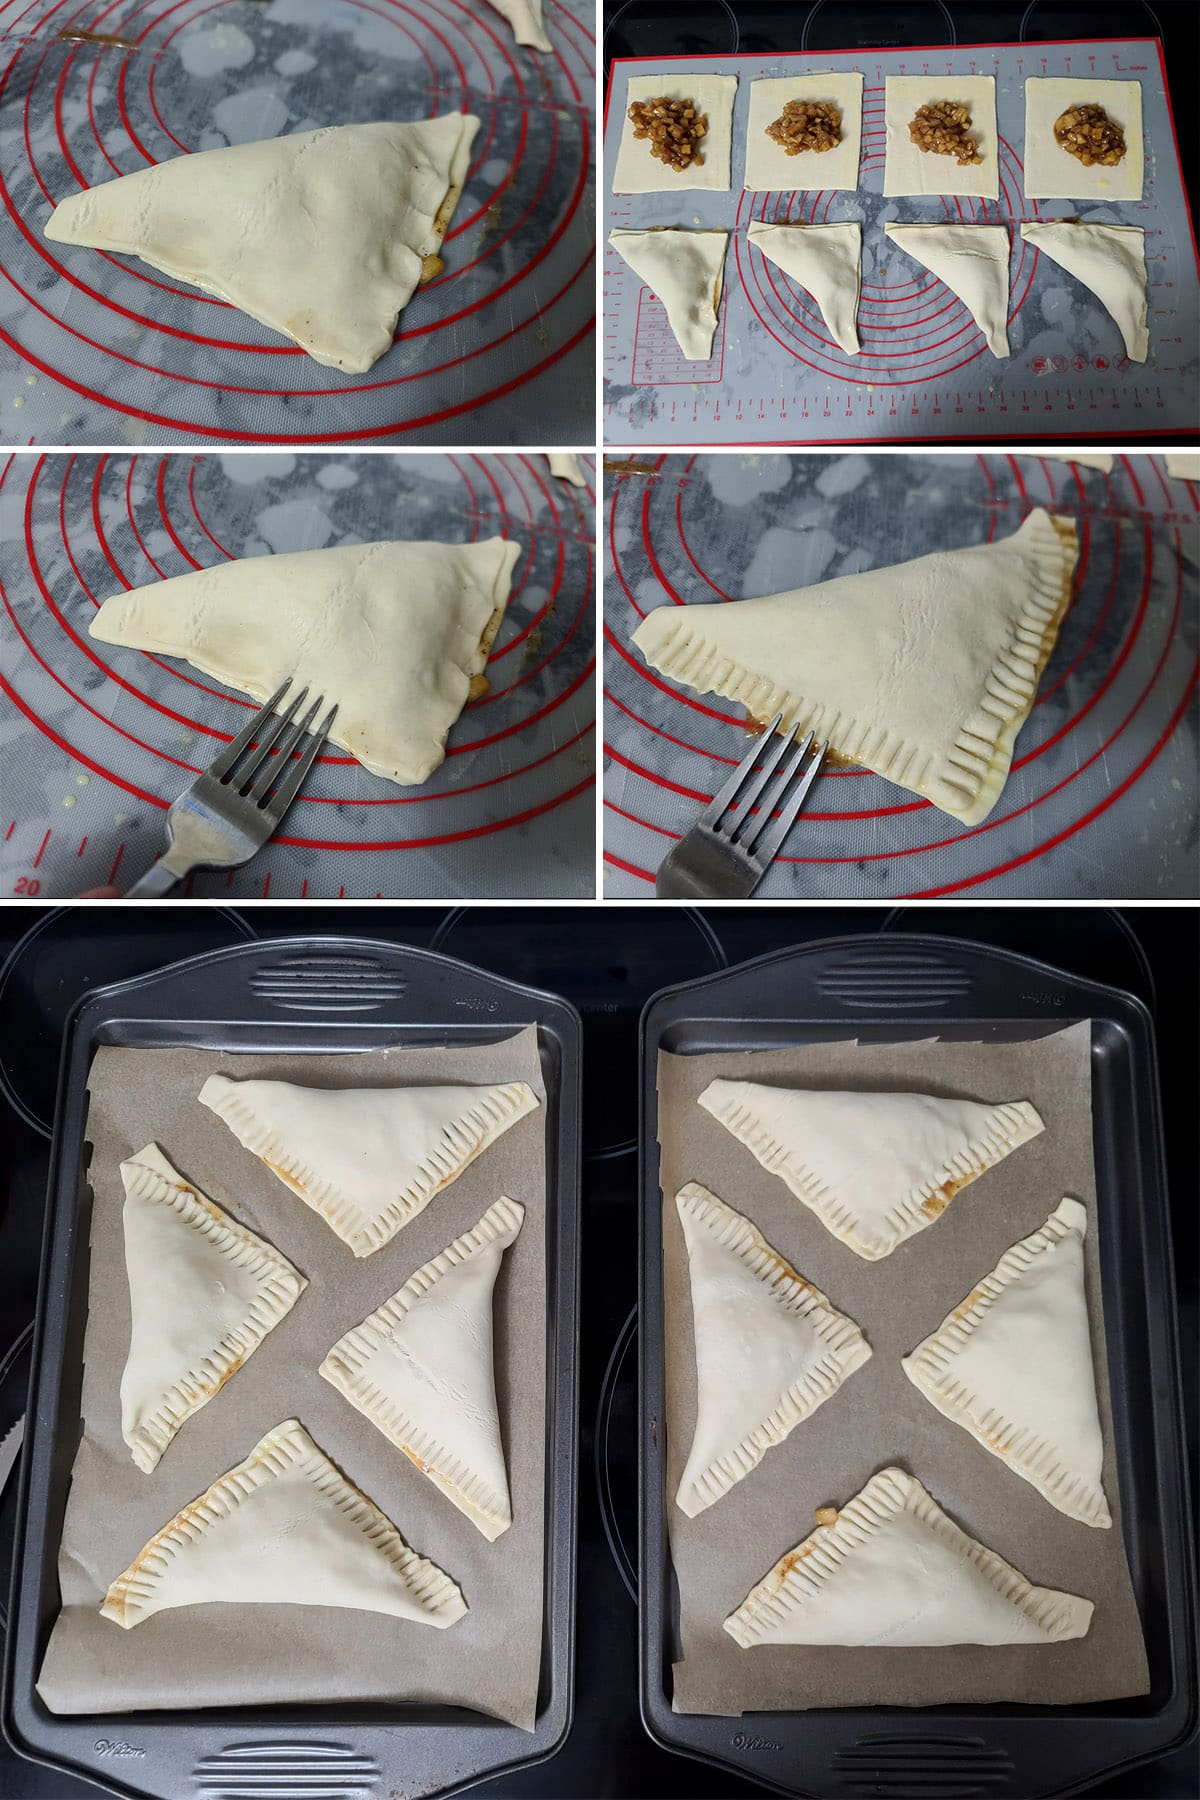 A 5 part image shownig the turnovers being folded, sealed, slits cut, and arranged on pans.